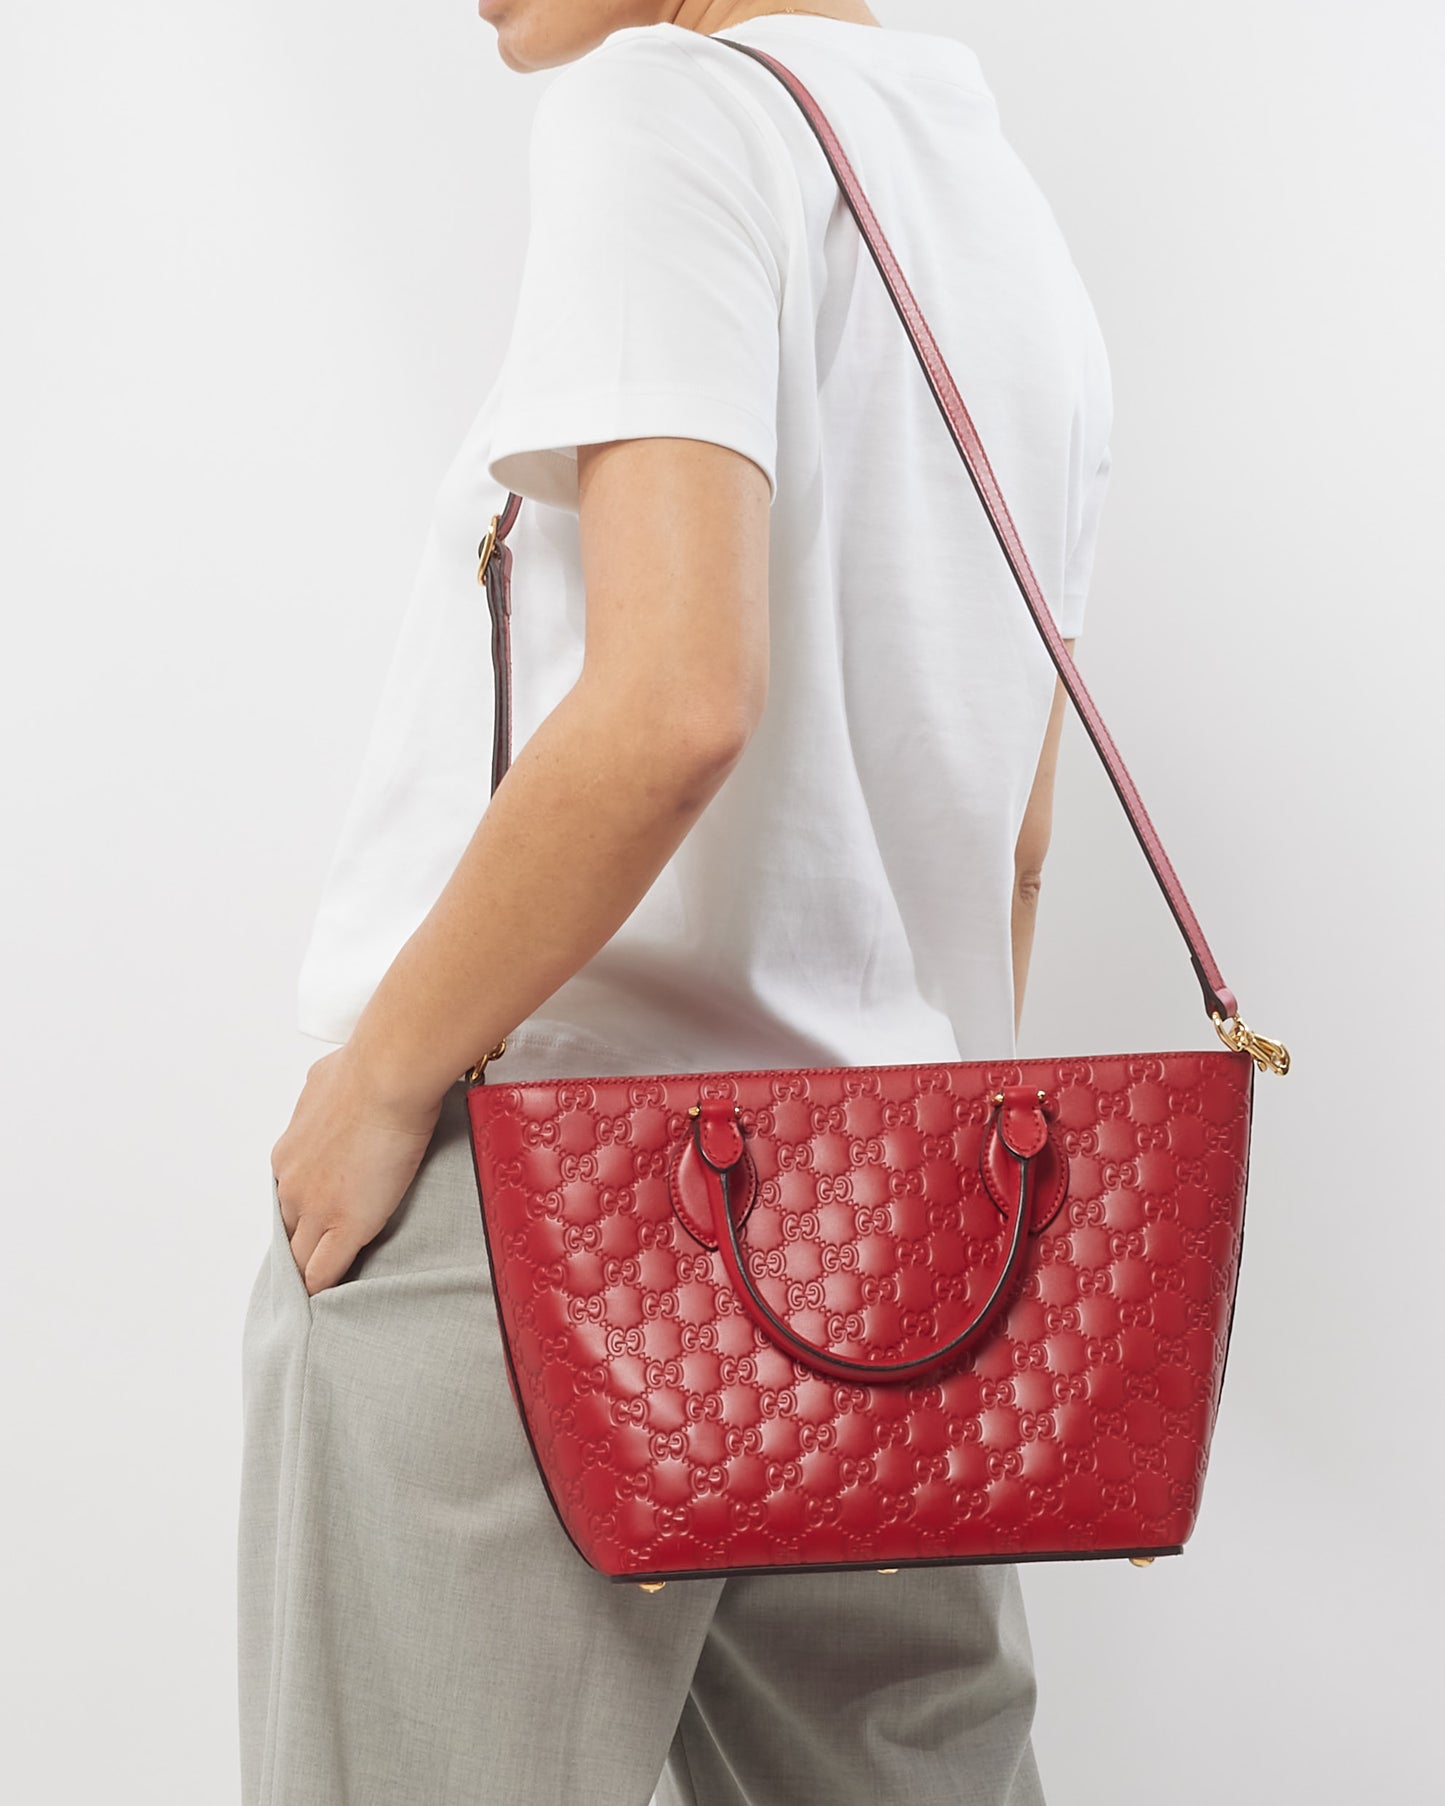 Gucci Red GG Signature G Monogram Leather Top Handle Bag